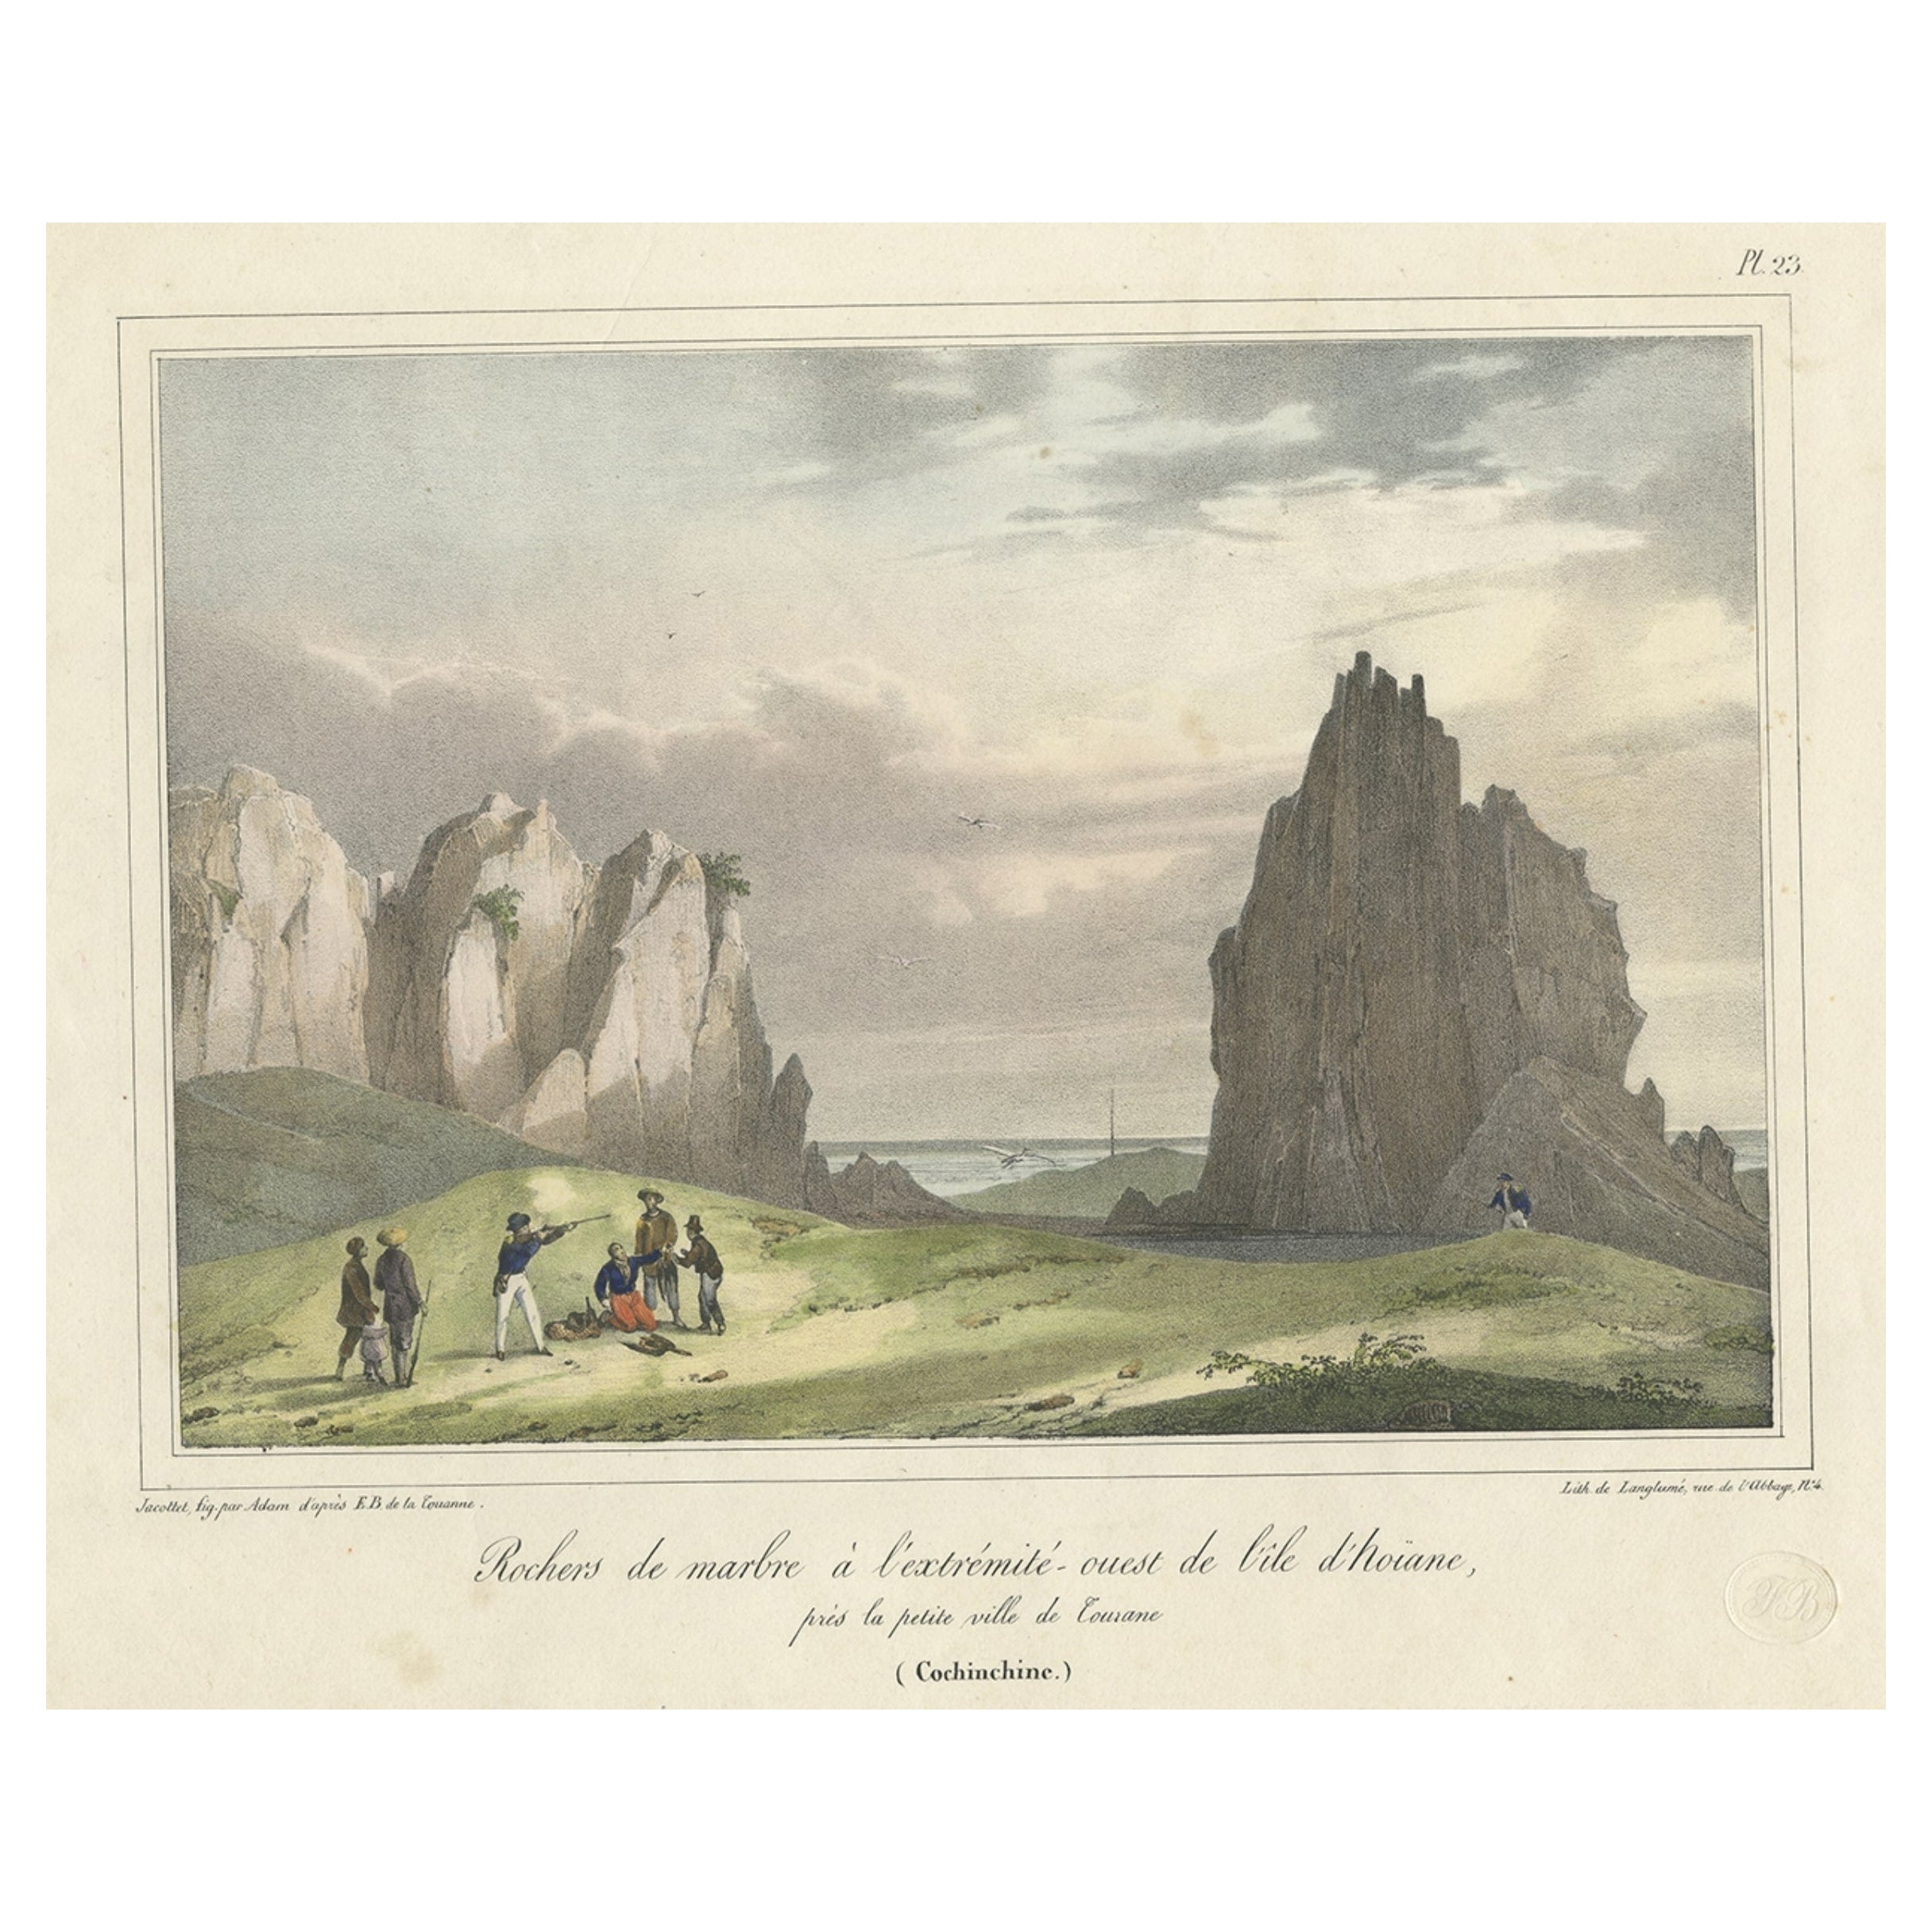 Old Print Depicting the Marble Mountain Rock of Hoi An, Vietnam, c.1840